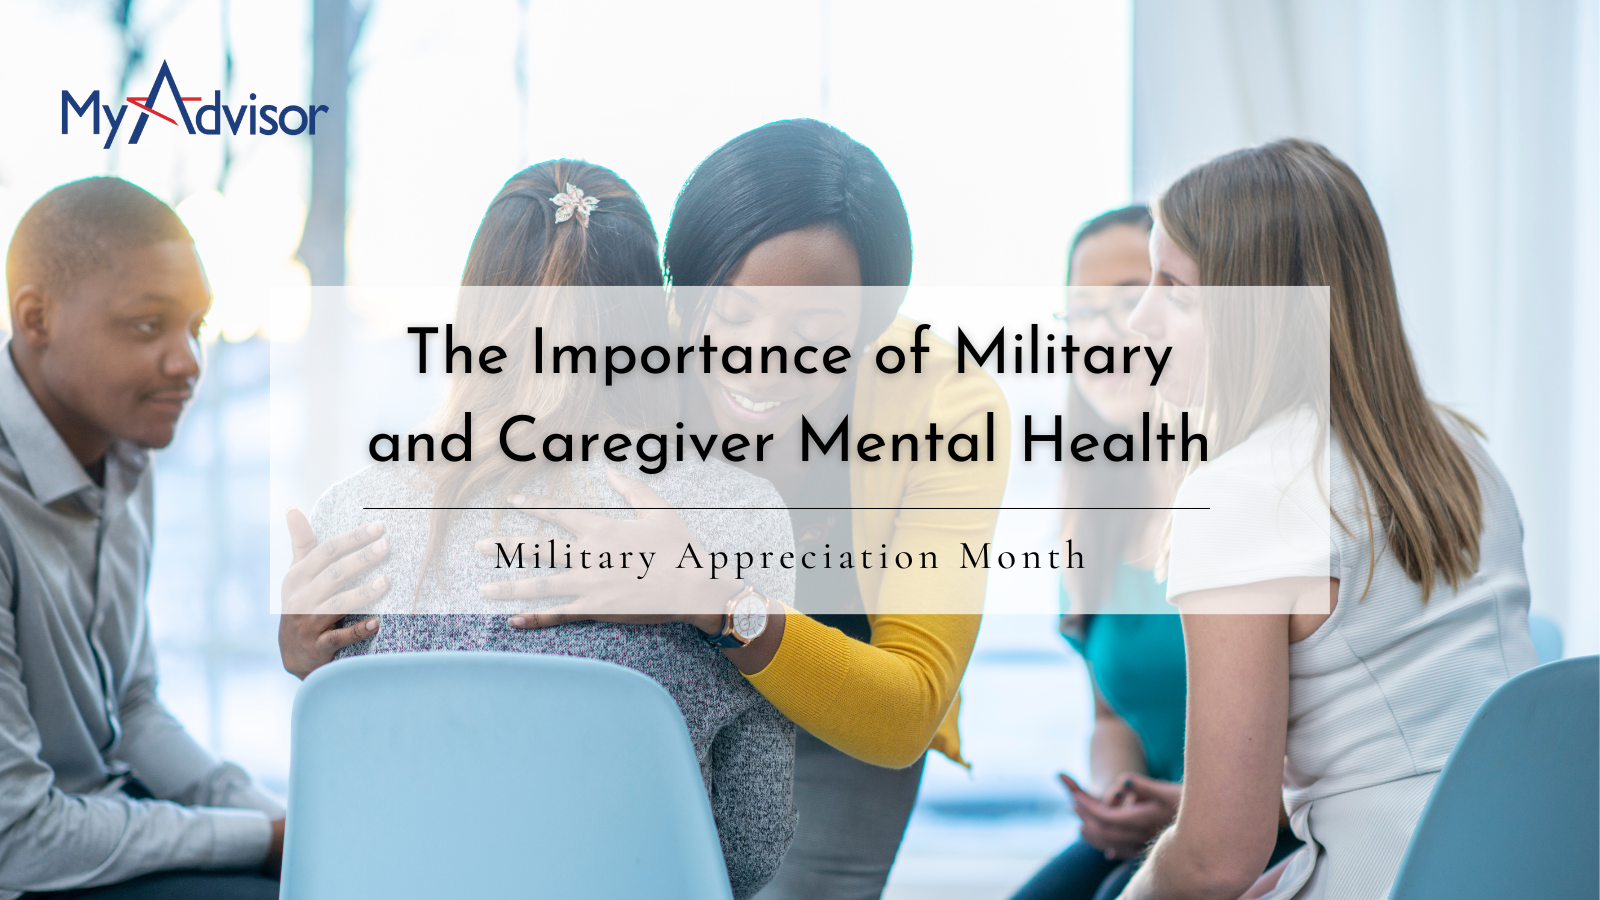 The Importance of Military and Caregiver Mental Health